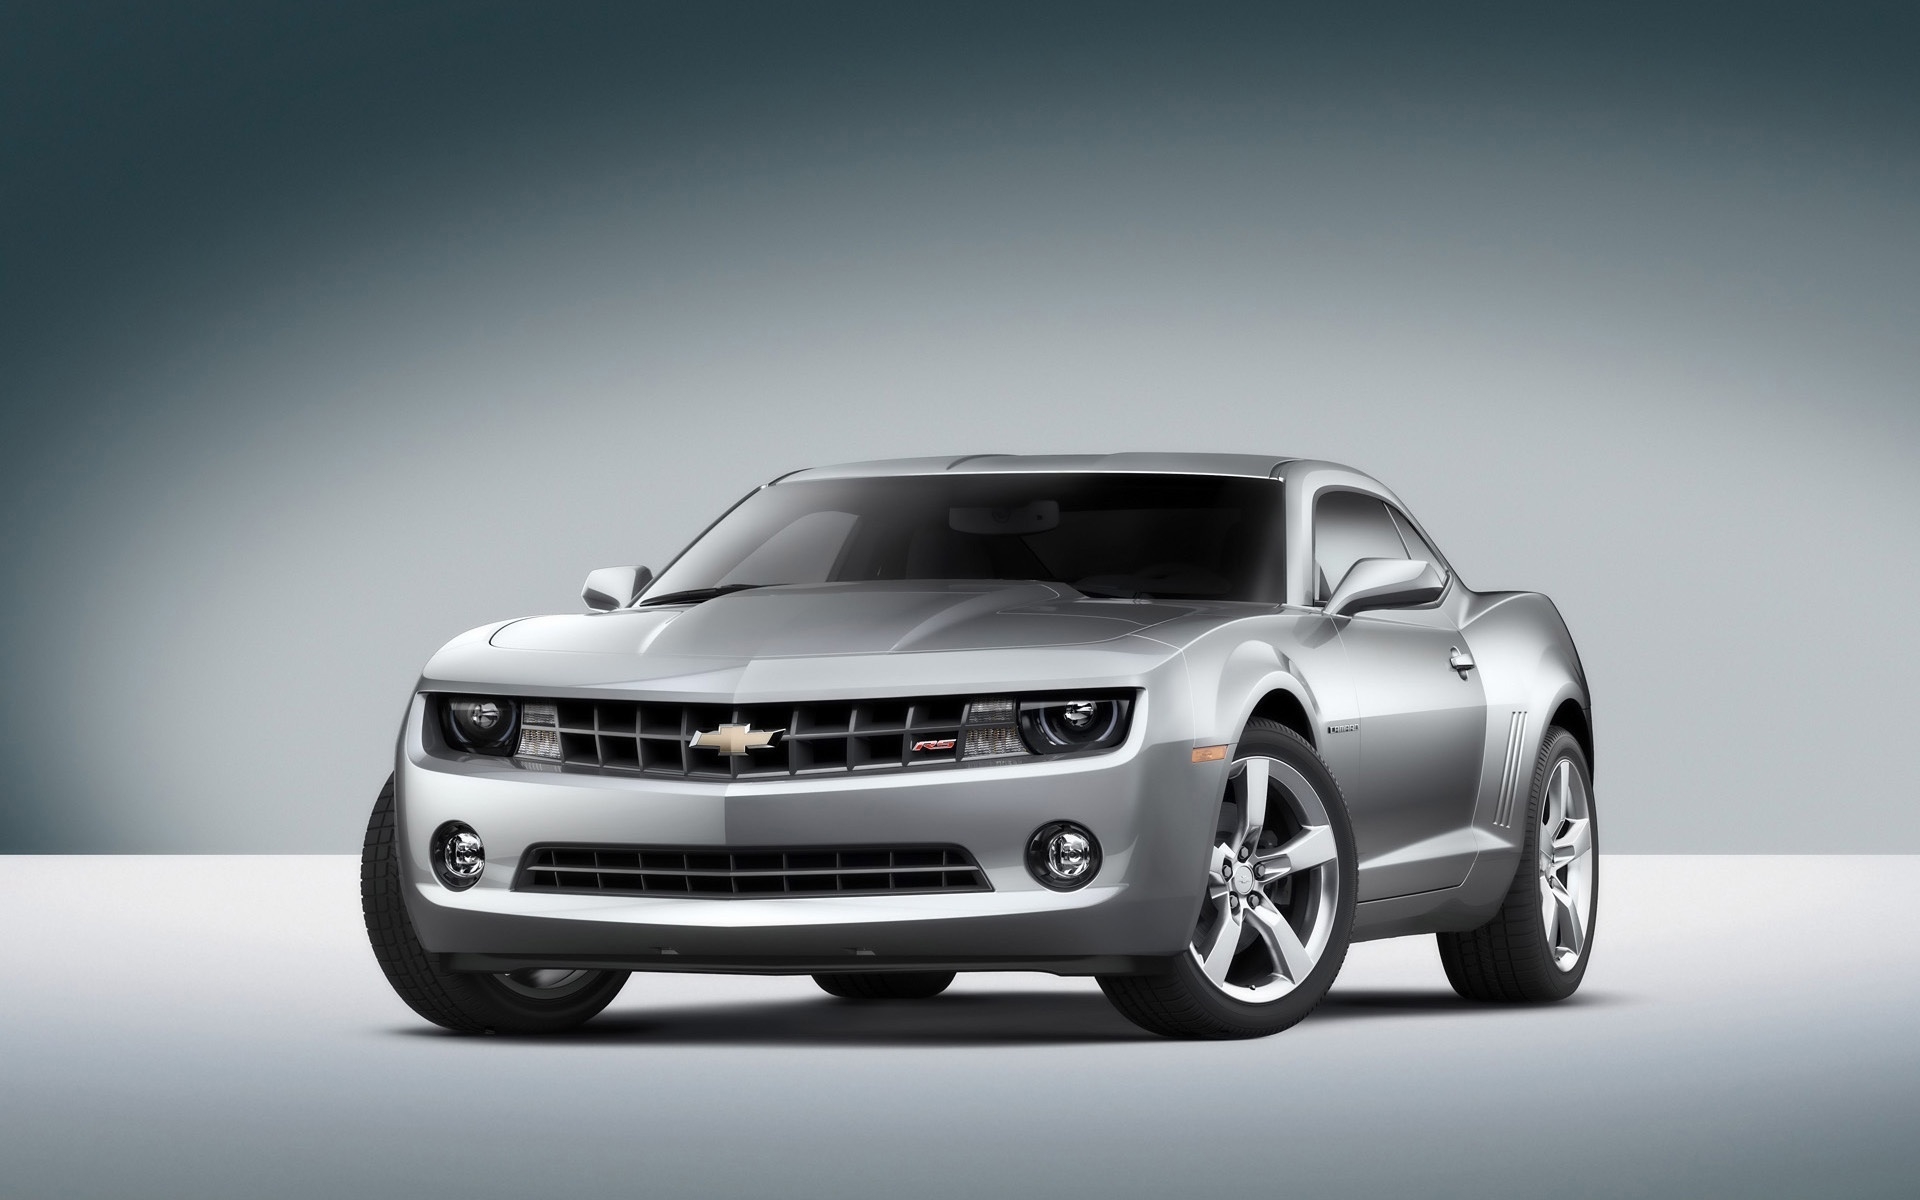 Chevrolet Camaro RS 2010 Grey Front Angle for 1920 x 1200 widescreen resolution